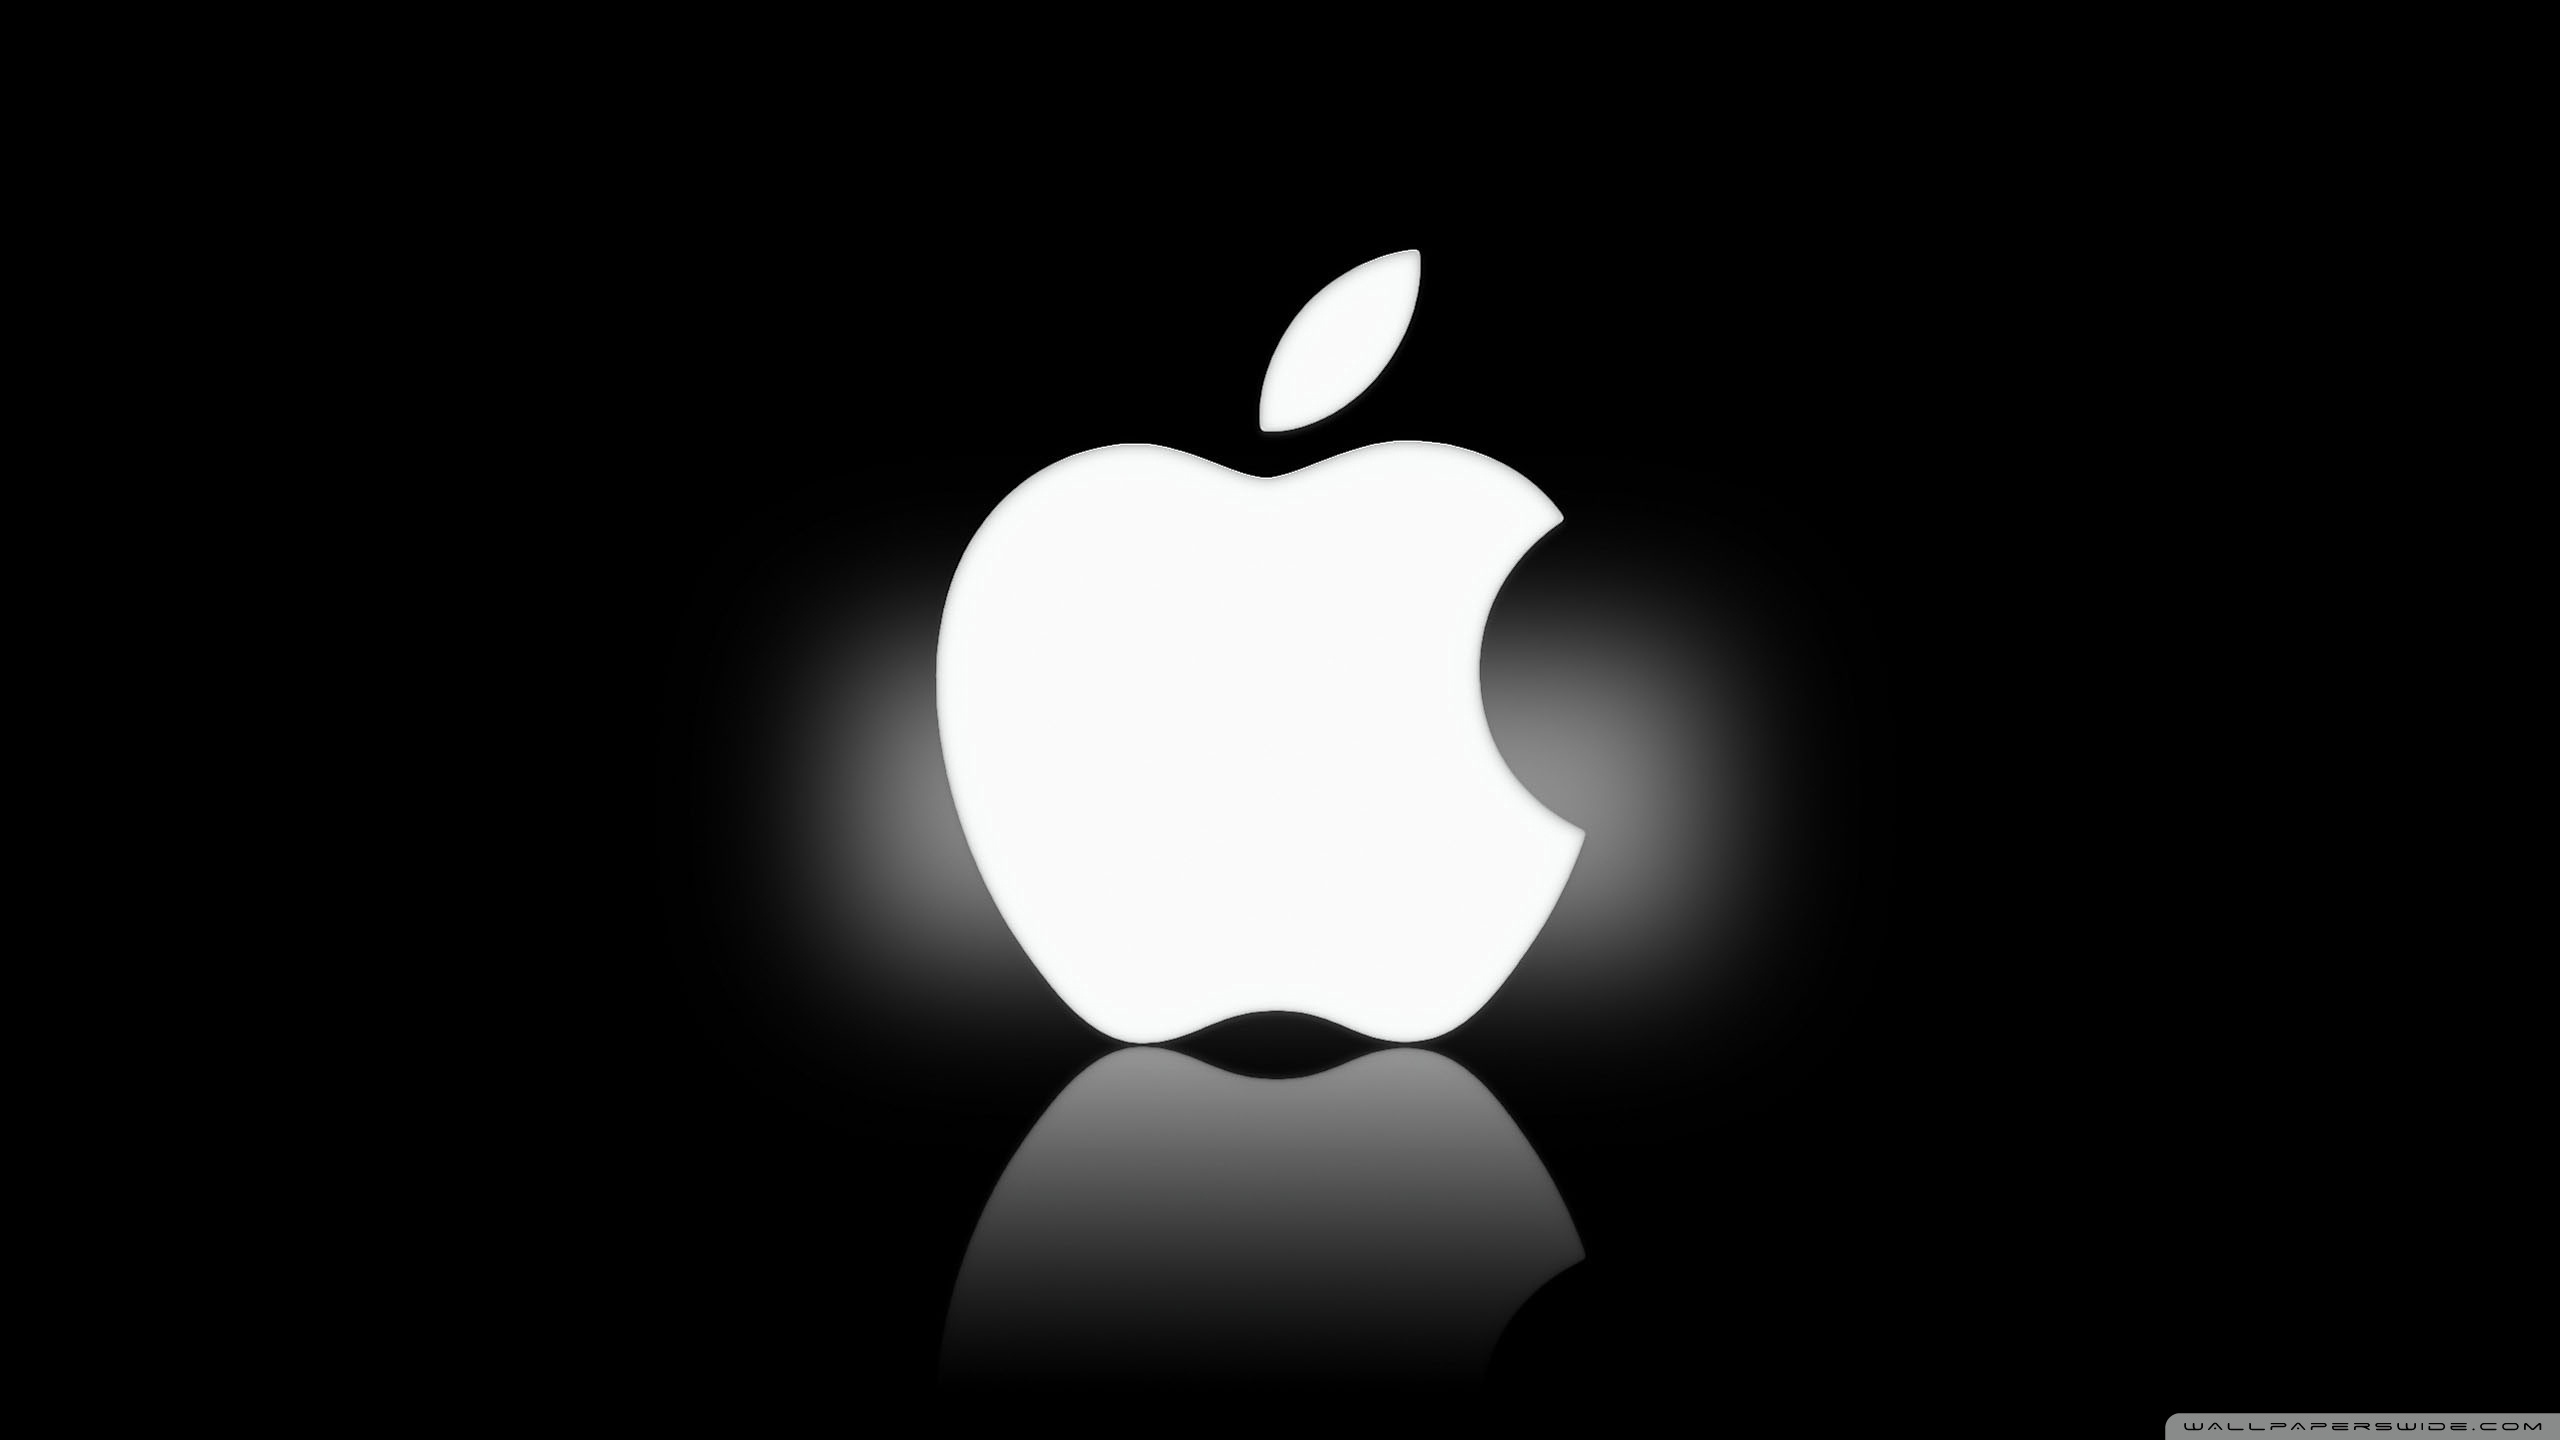 Think different apple wallpaper